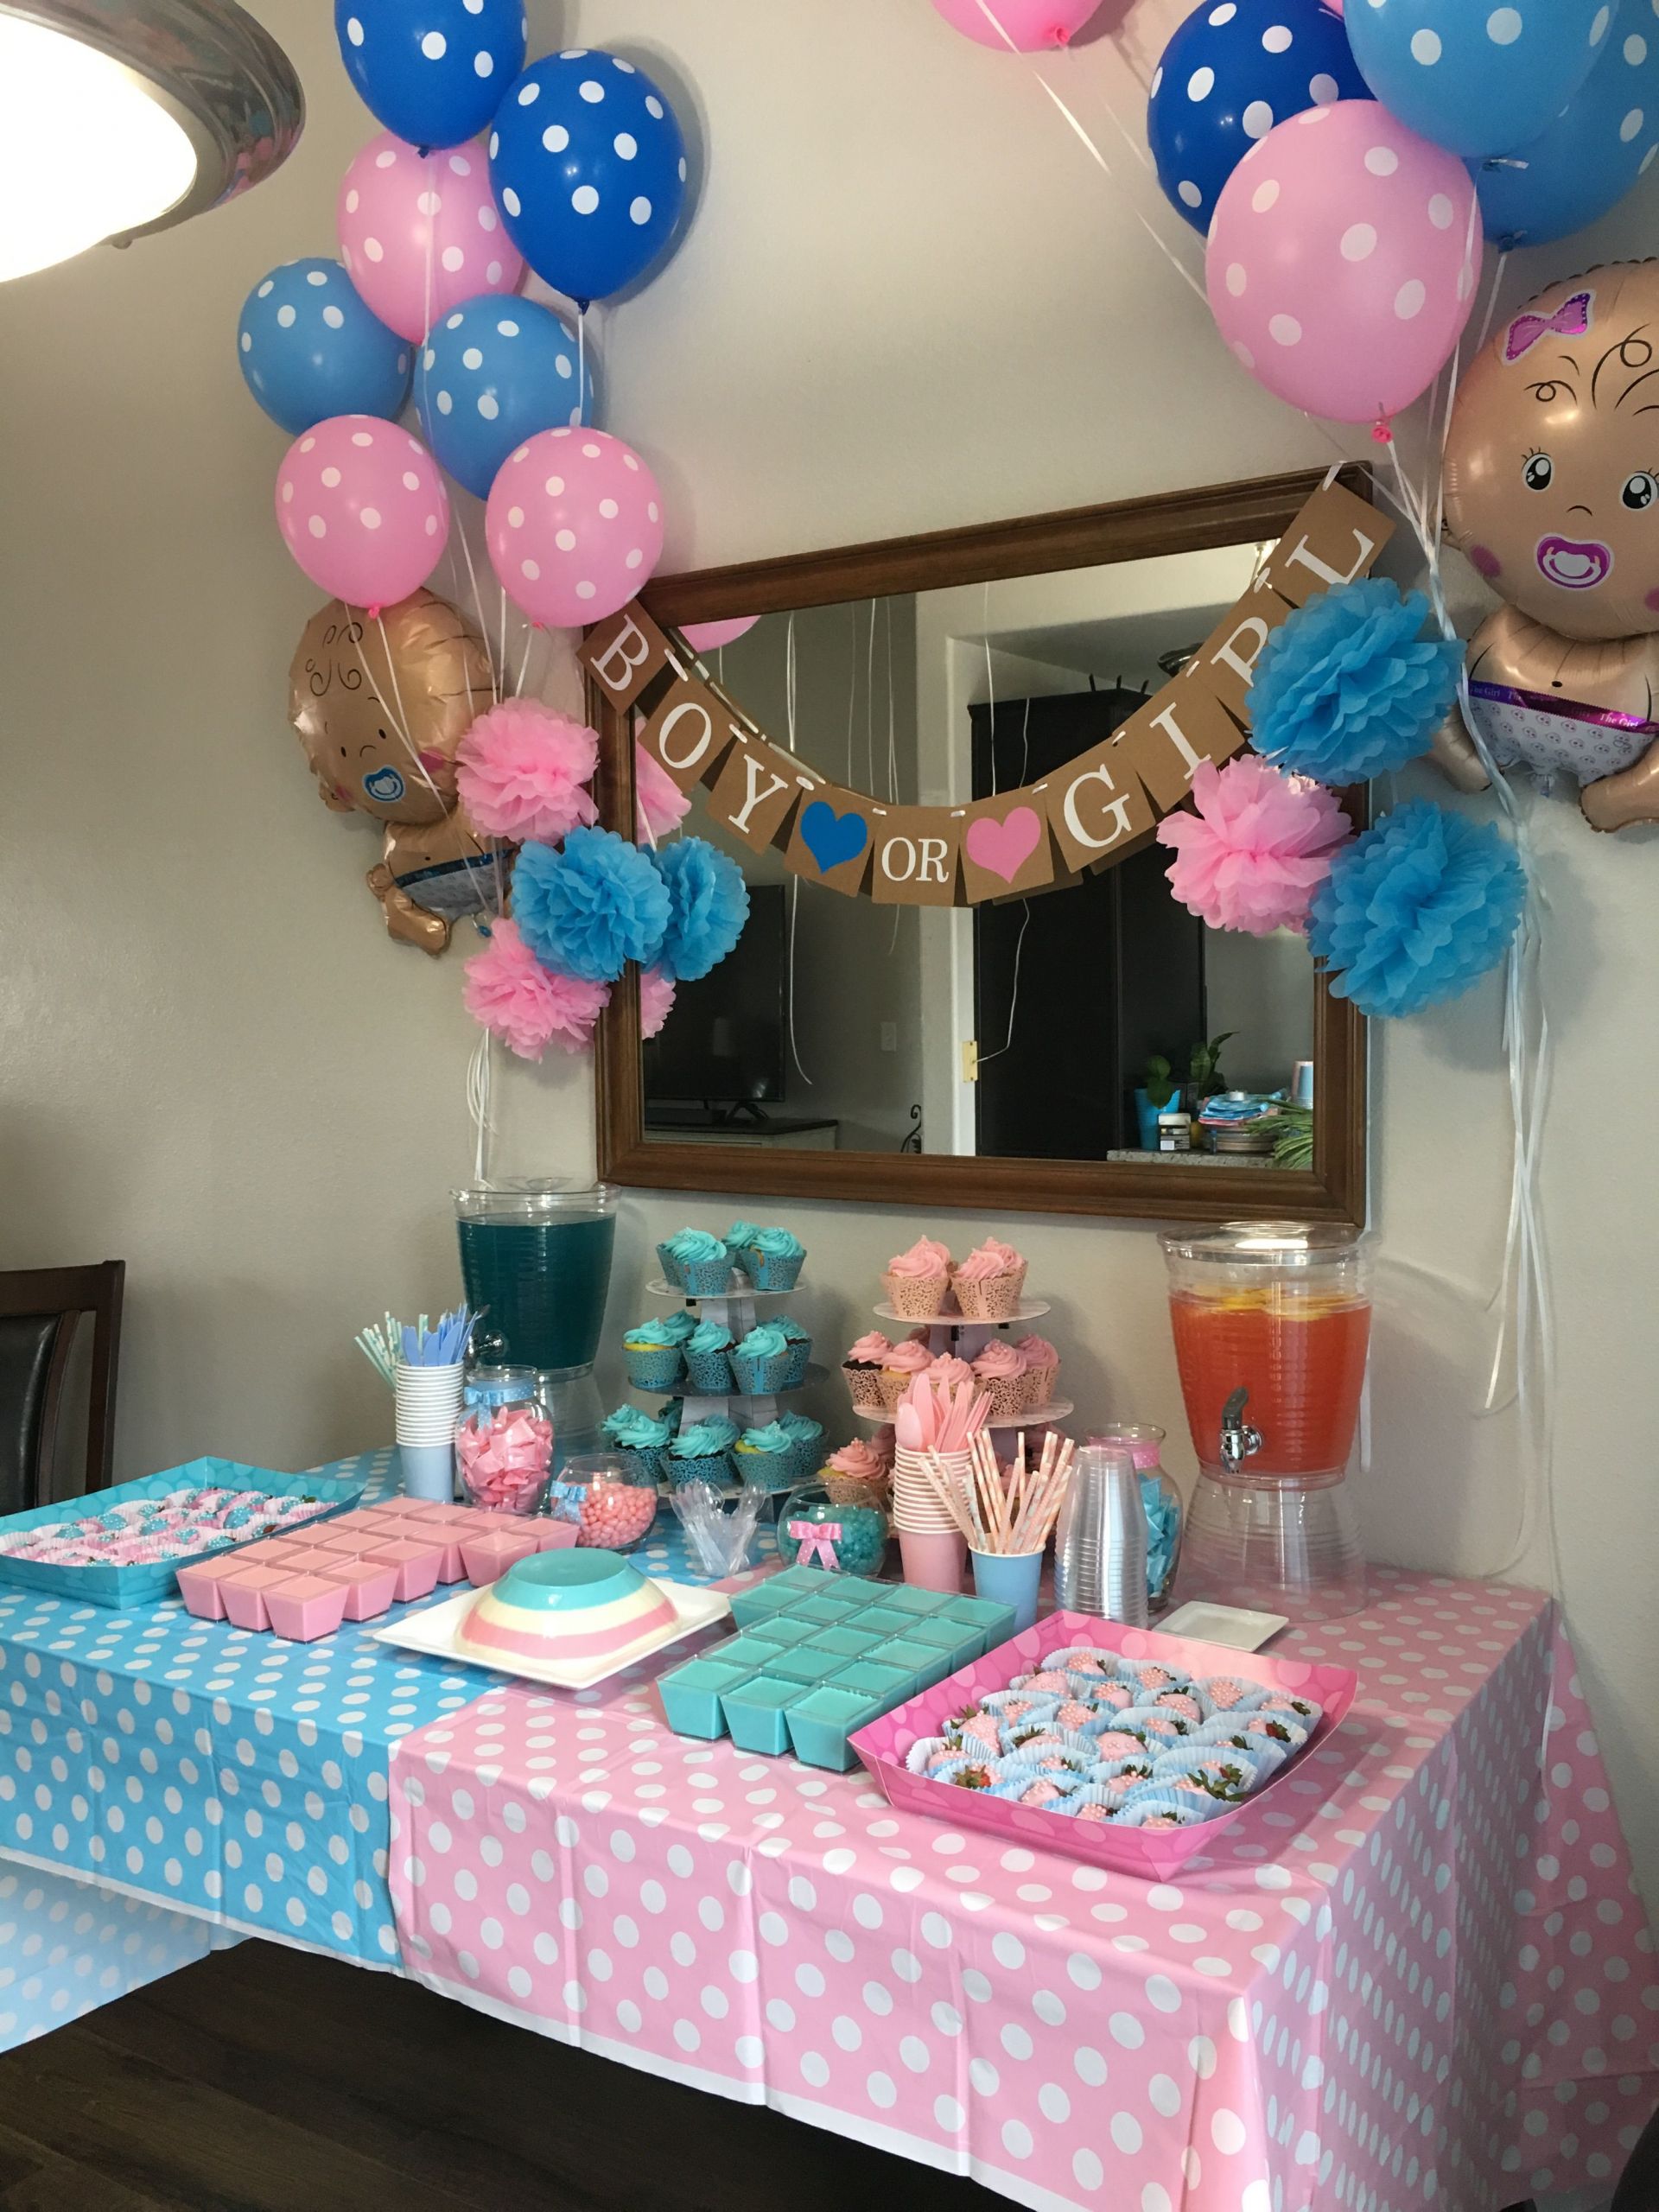 Great Gender Reveal Party Ideas
 Pin on Baby reveal party